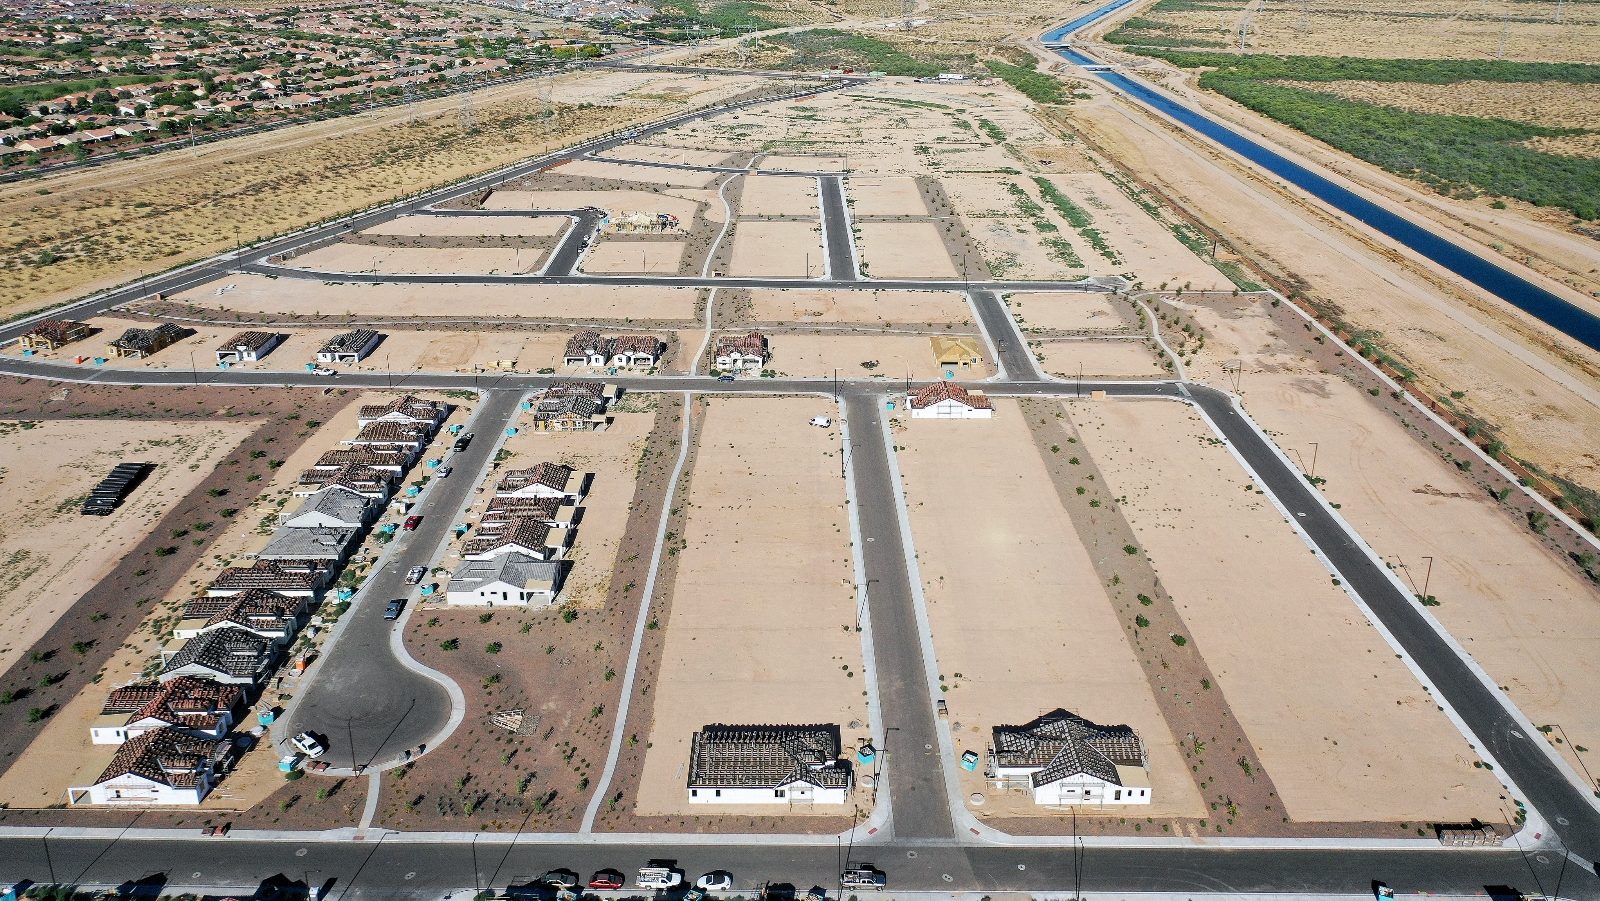 An aerial view of homes under construction in Buckeye, Arizona, outside of Phoenix. The state government paused new housing construction in the area last year over concerns about water availability.